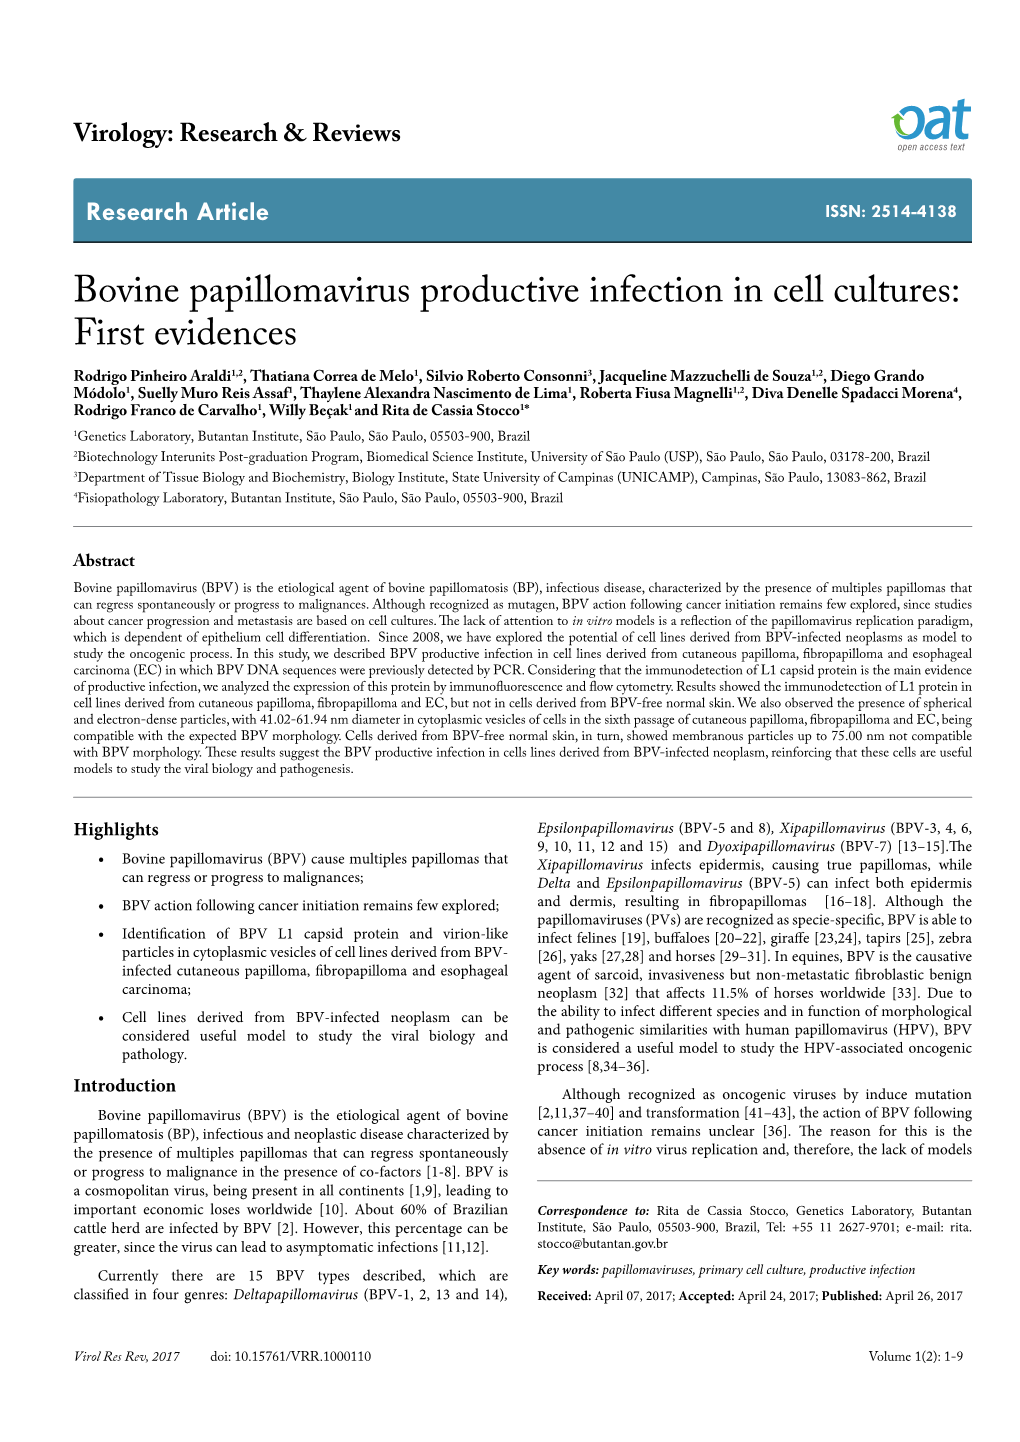 Bovine Papillomavirus Productive Infection in Cell Cultures